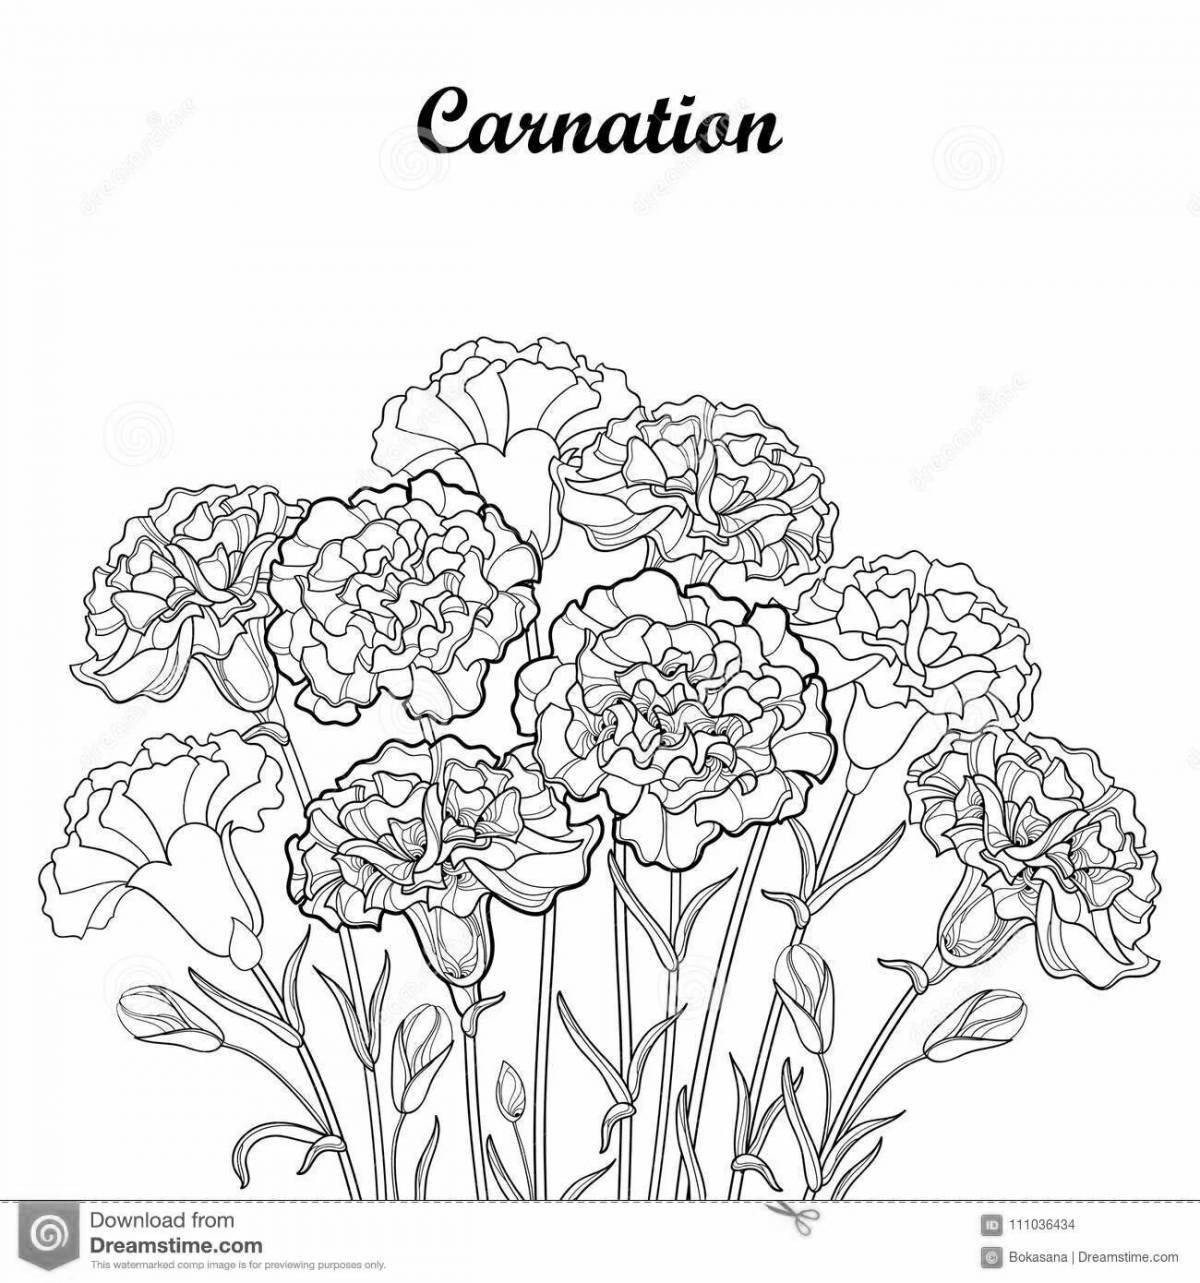 Coloring amazing bunch of carnations